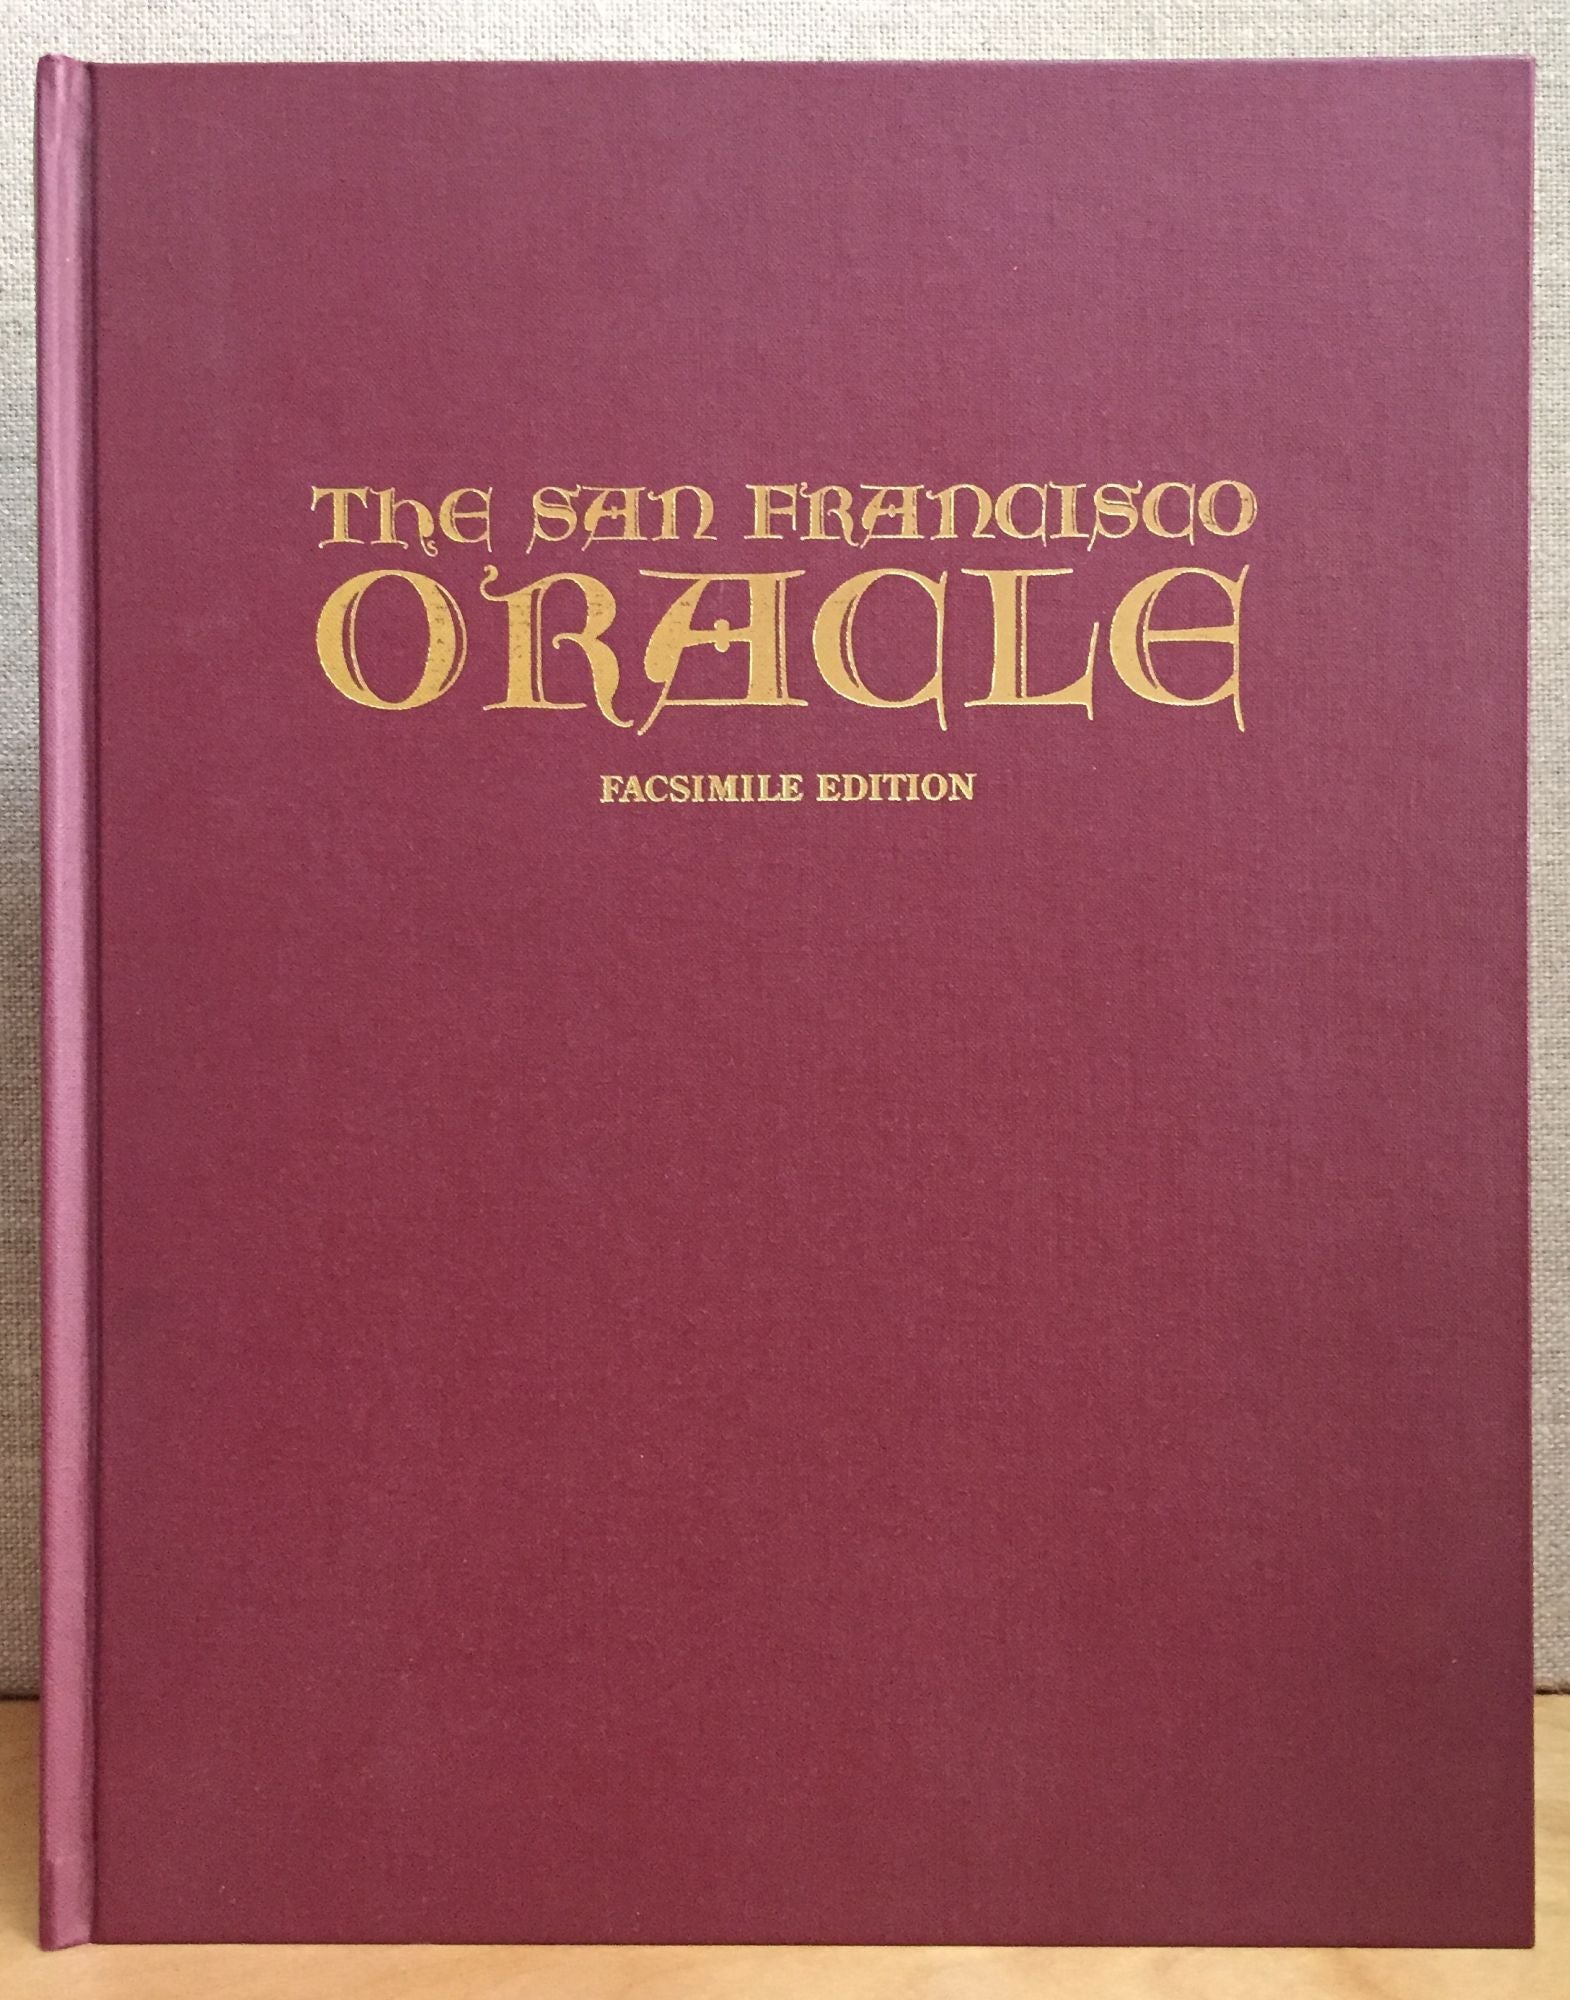 The San Francisco Oracle Facsimile Edition: The Psychedelic Newspaper of  the Haight-Ashbury 1966-1968 by Allen Cohen on J. Michaels Books